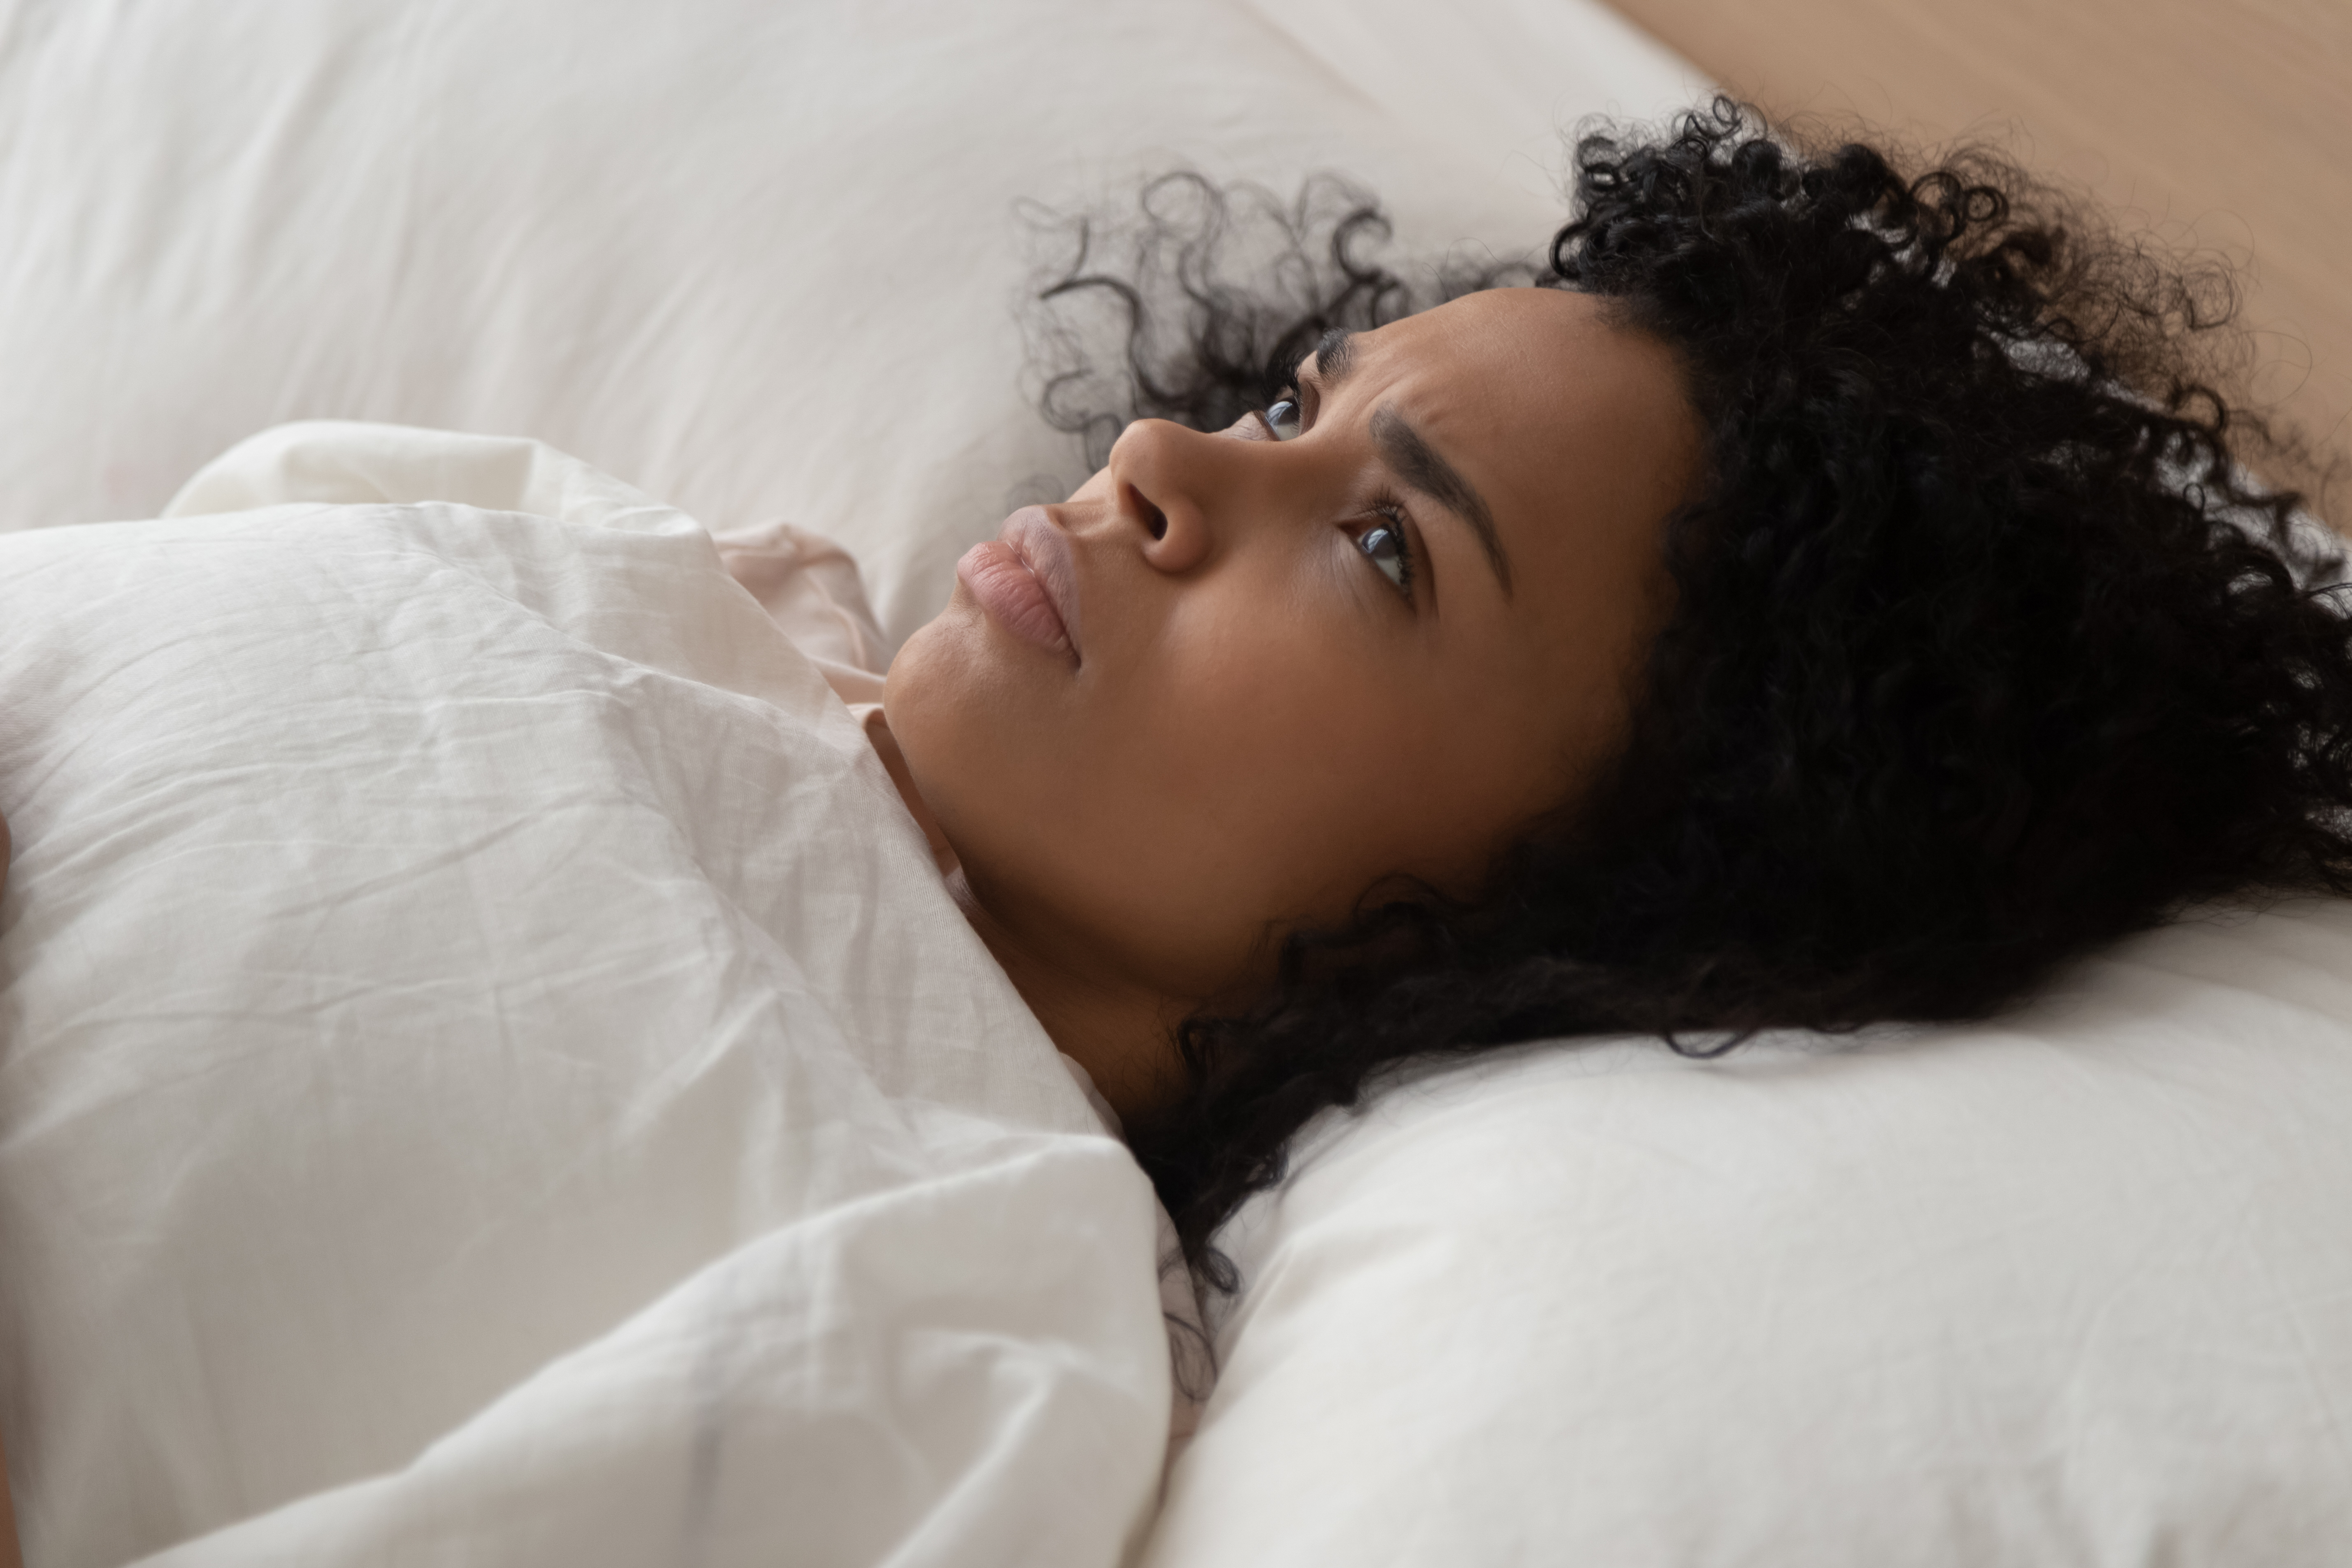 A black woman facing up while having trouble falling asleep | Source: Shutterstock